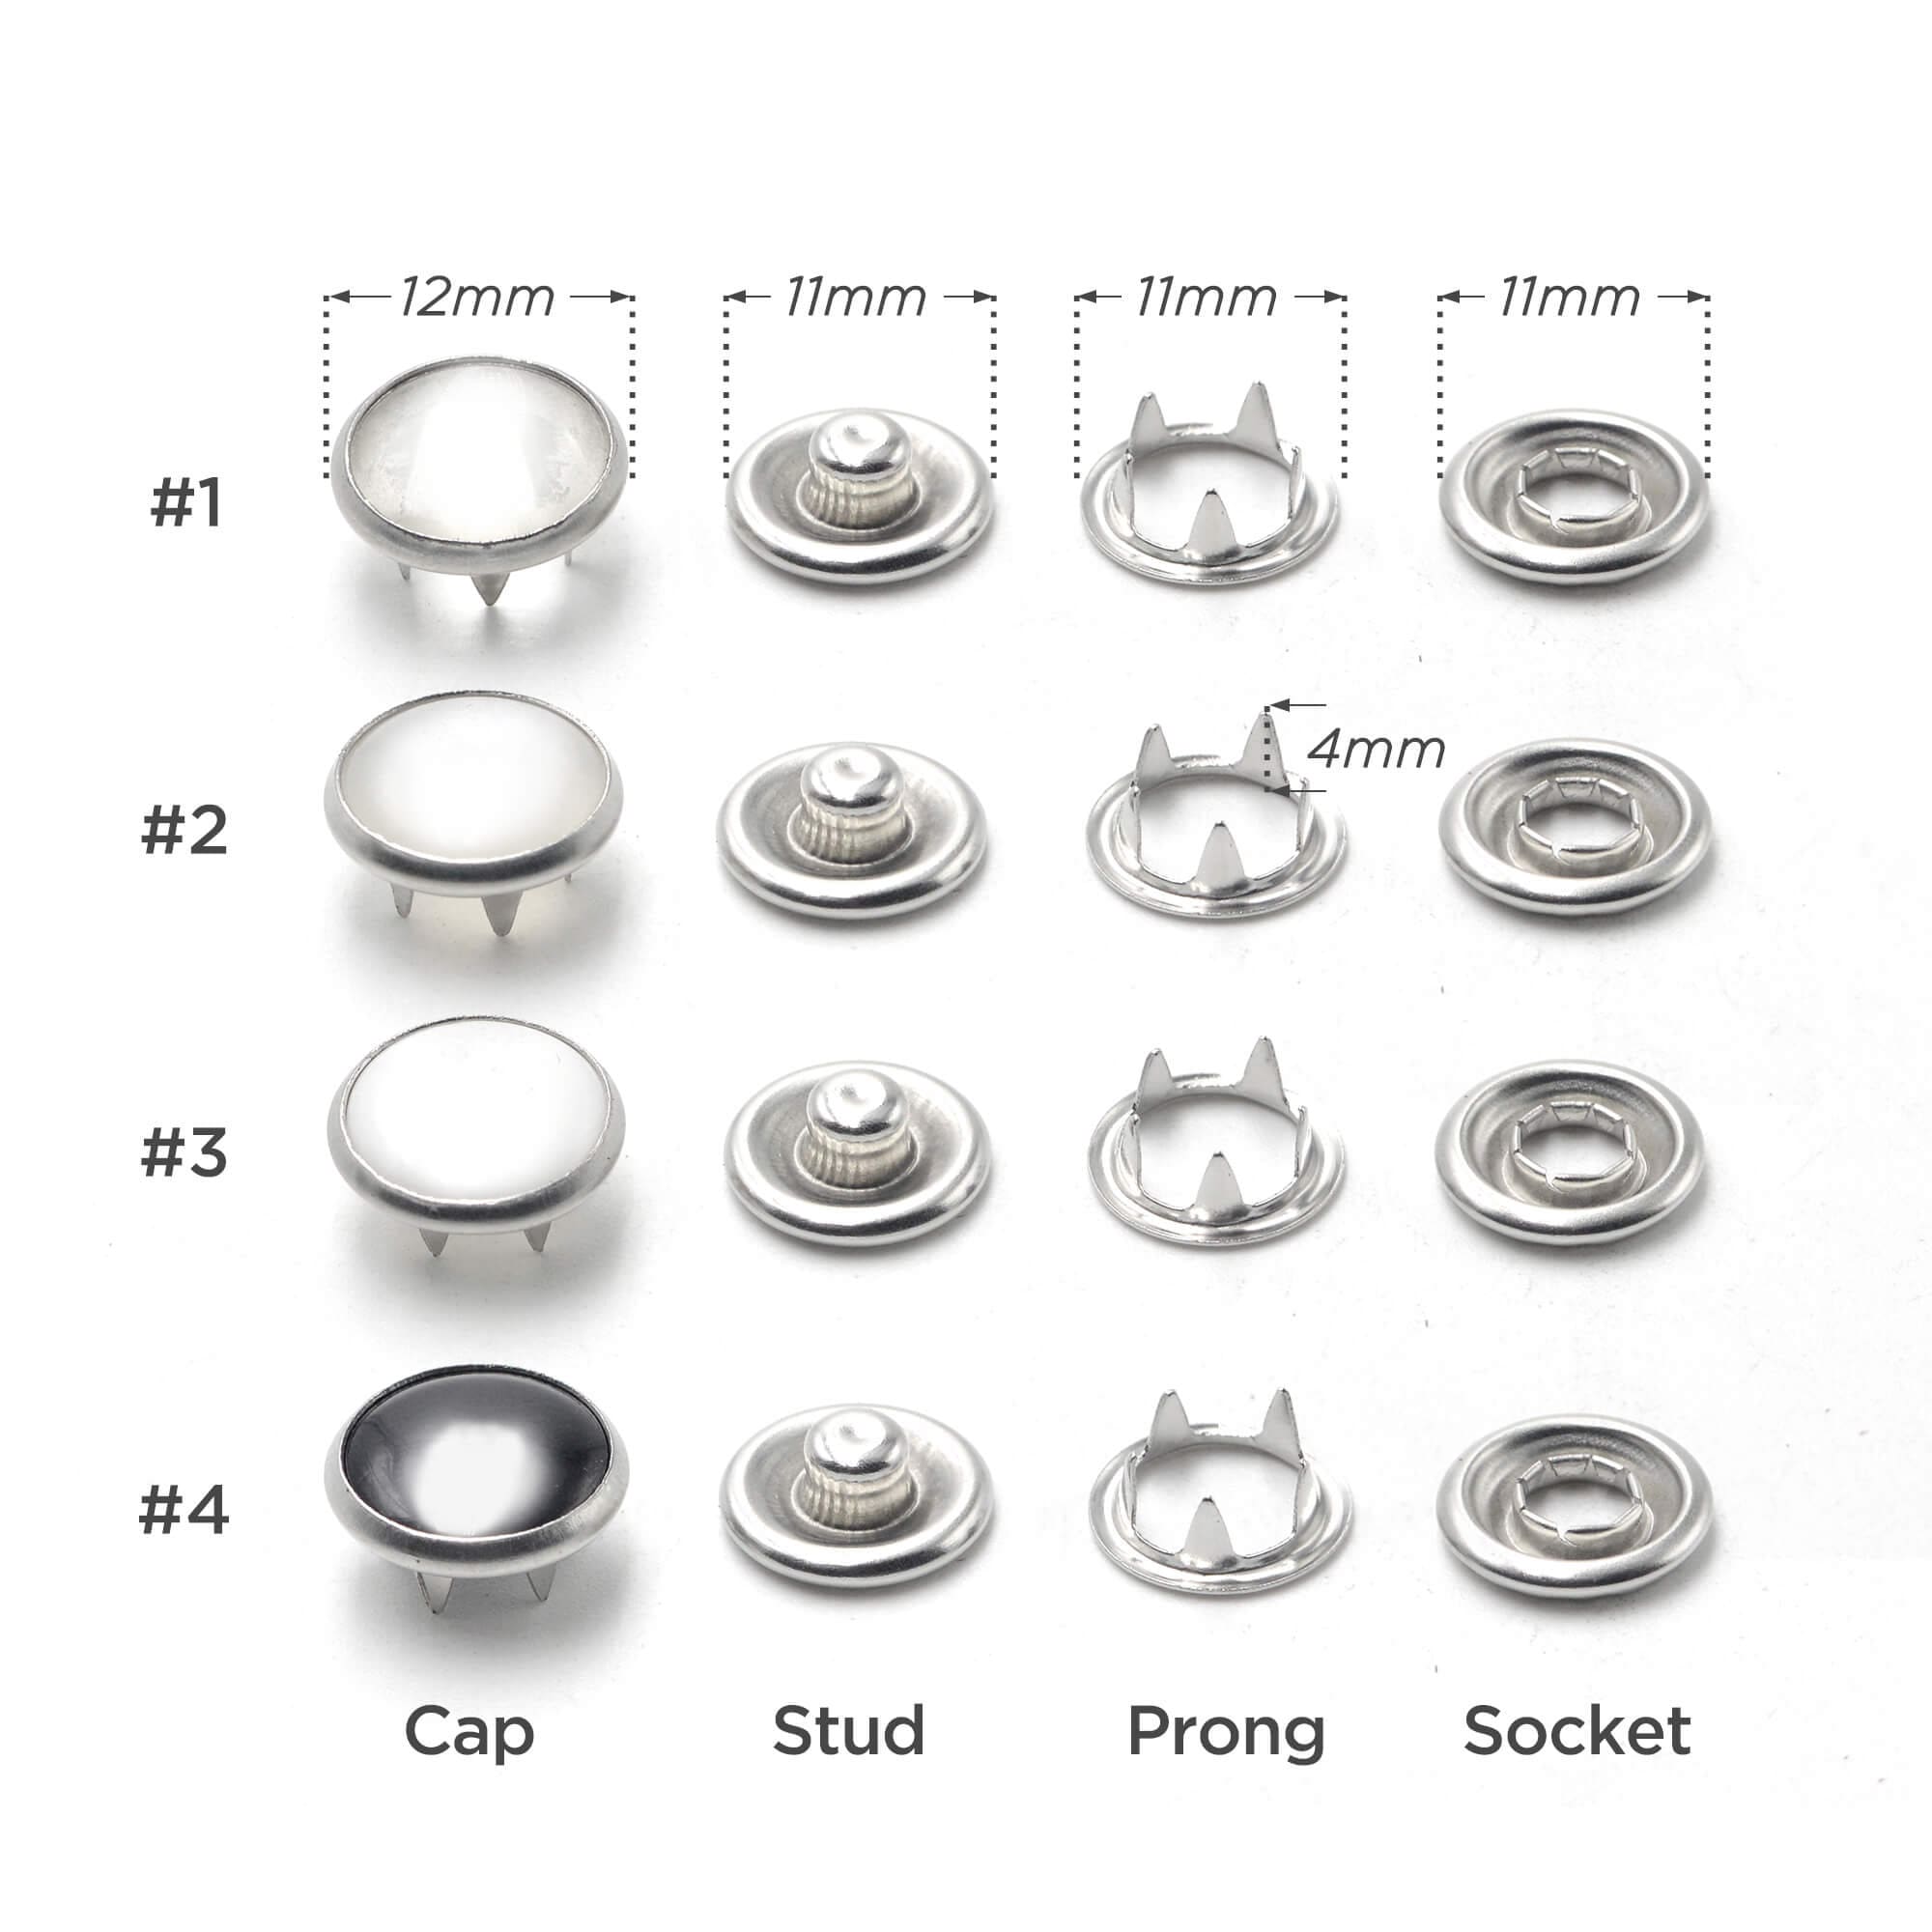 25 Silver Metal Snaps for Clothing, Bodysuit Snaps Size 15, Baby Clothes  Snaps, Metal Snap Fasteners 10mm No Sew, Cap Snap Buttons, Poppers 